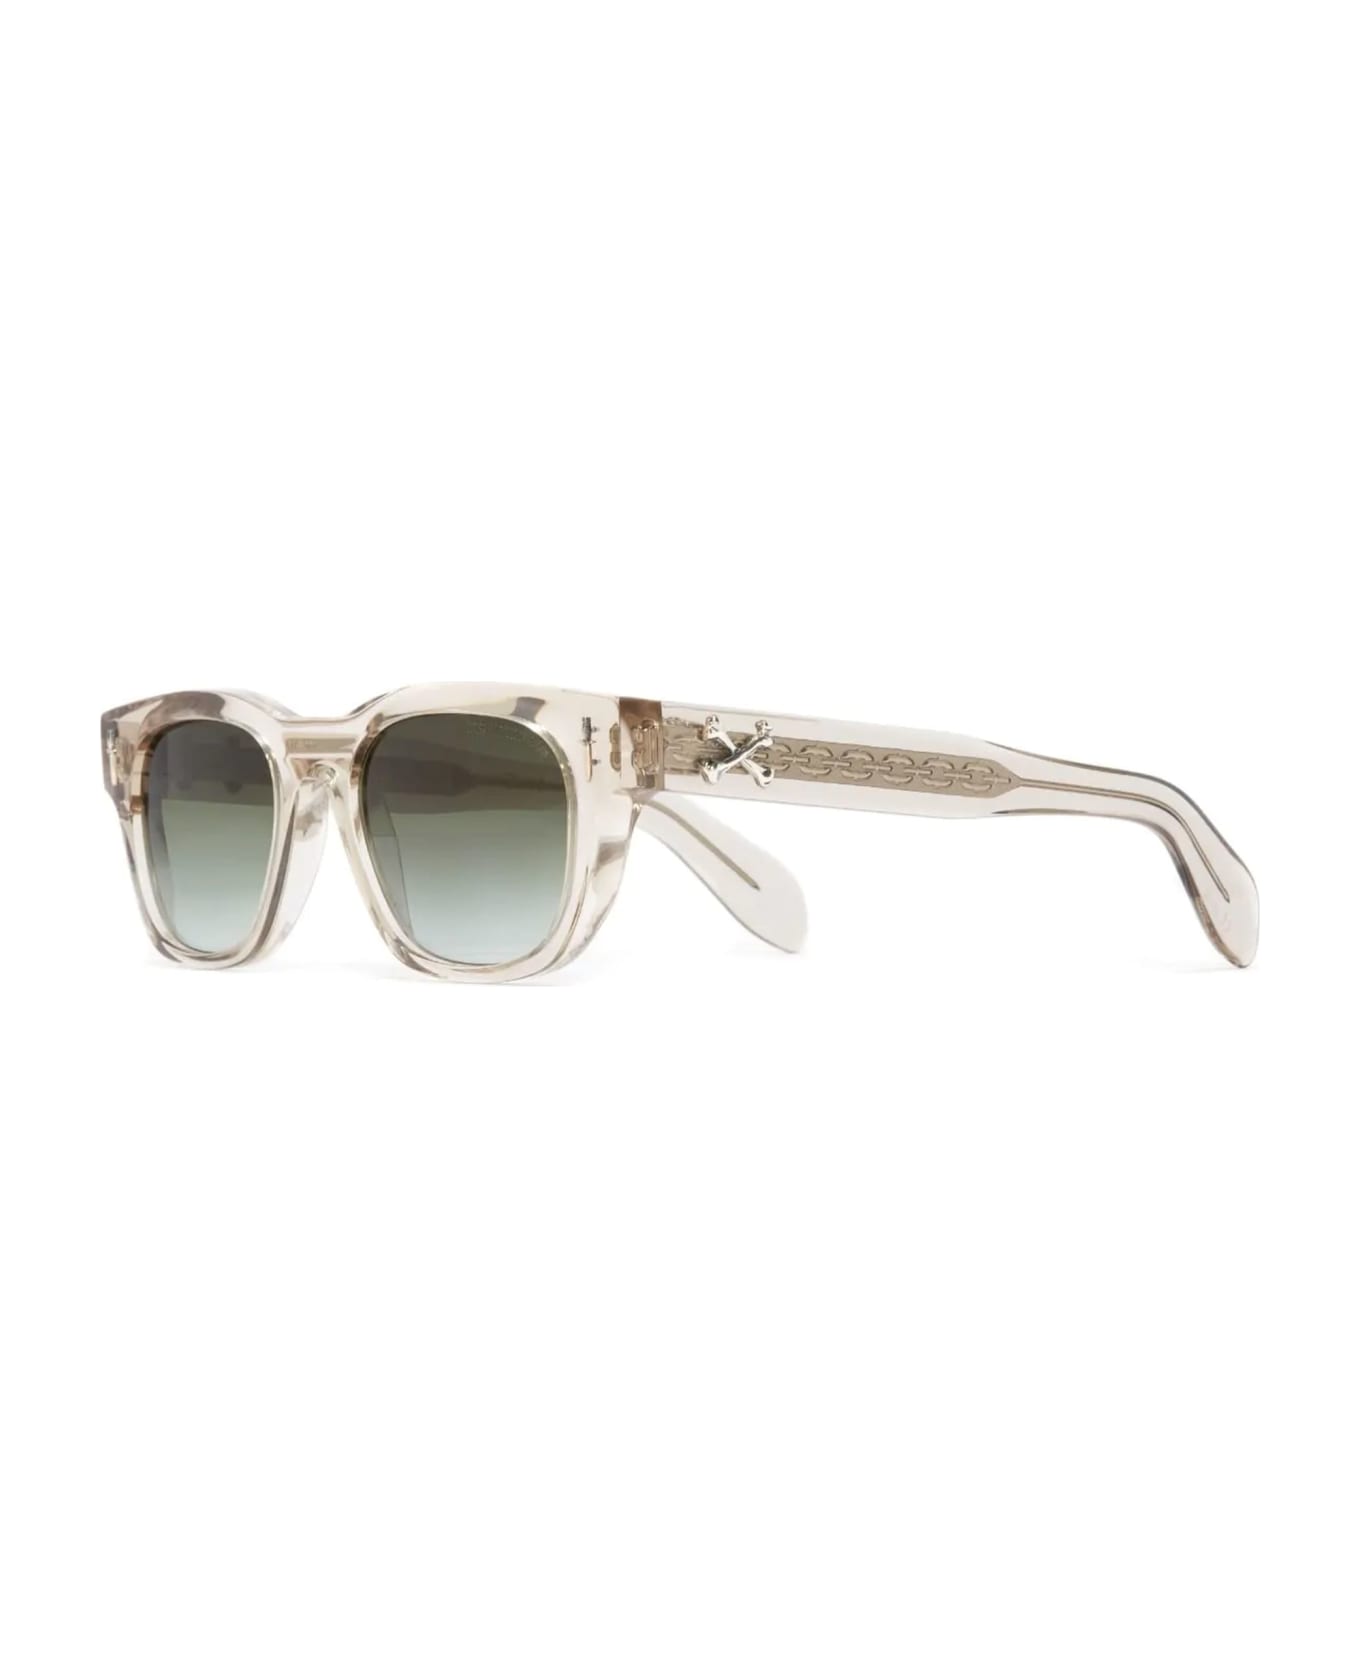 Cutler and Gross The Great Frog - Crossbones - Sand Crystal Sunglasses - transparent beige